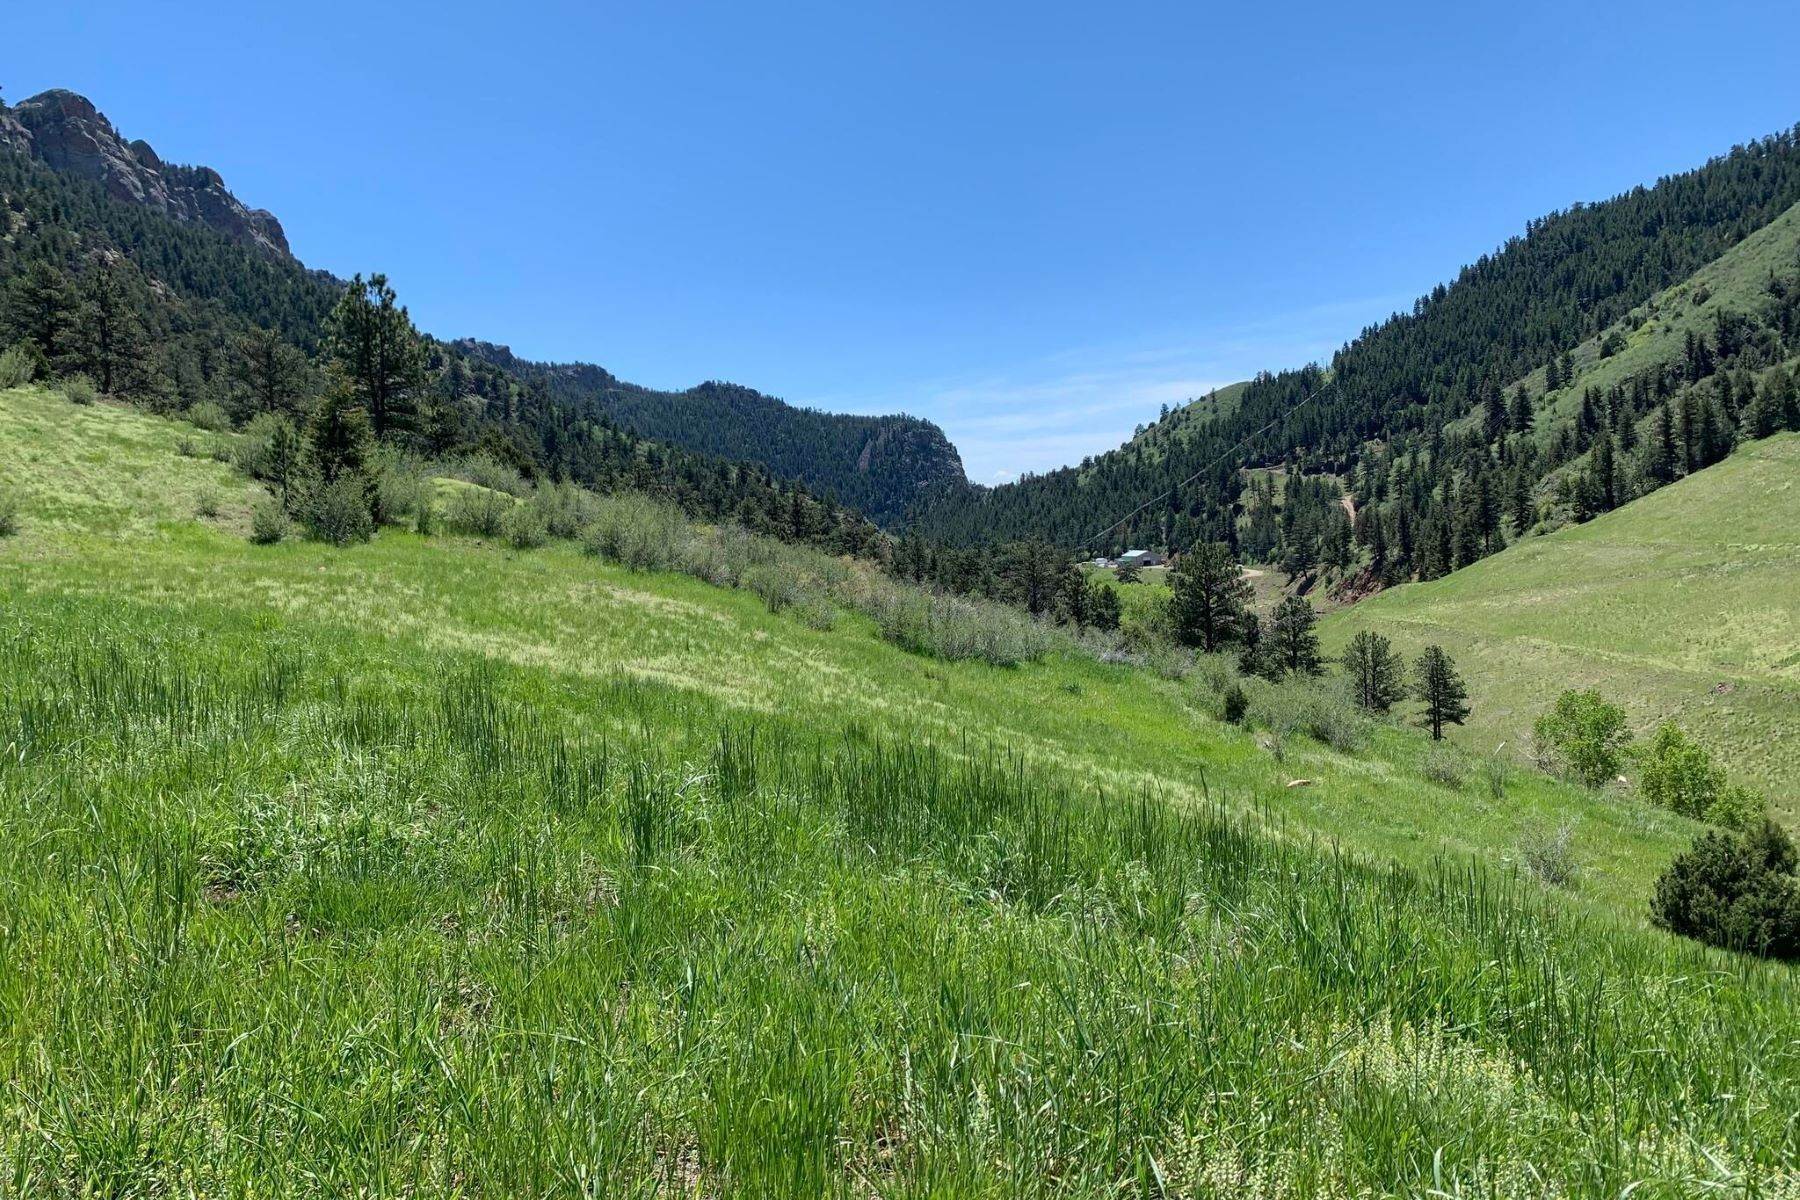 Property for Active at 8330 Glencoe Valley Road, Golden, CO, 80403 8330 Glencoe Valley Road Golden, Colorado 80403 United States